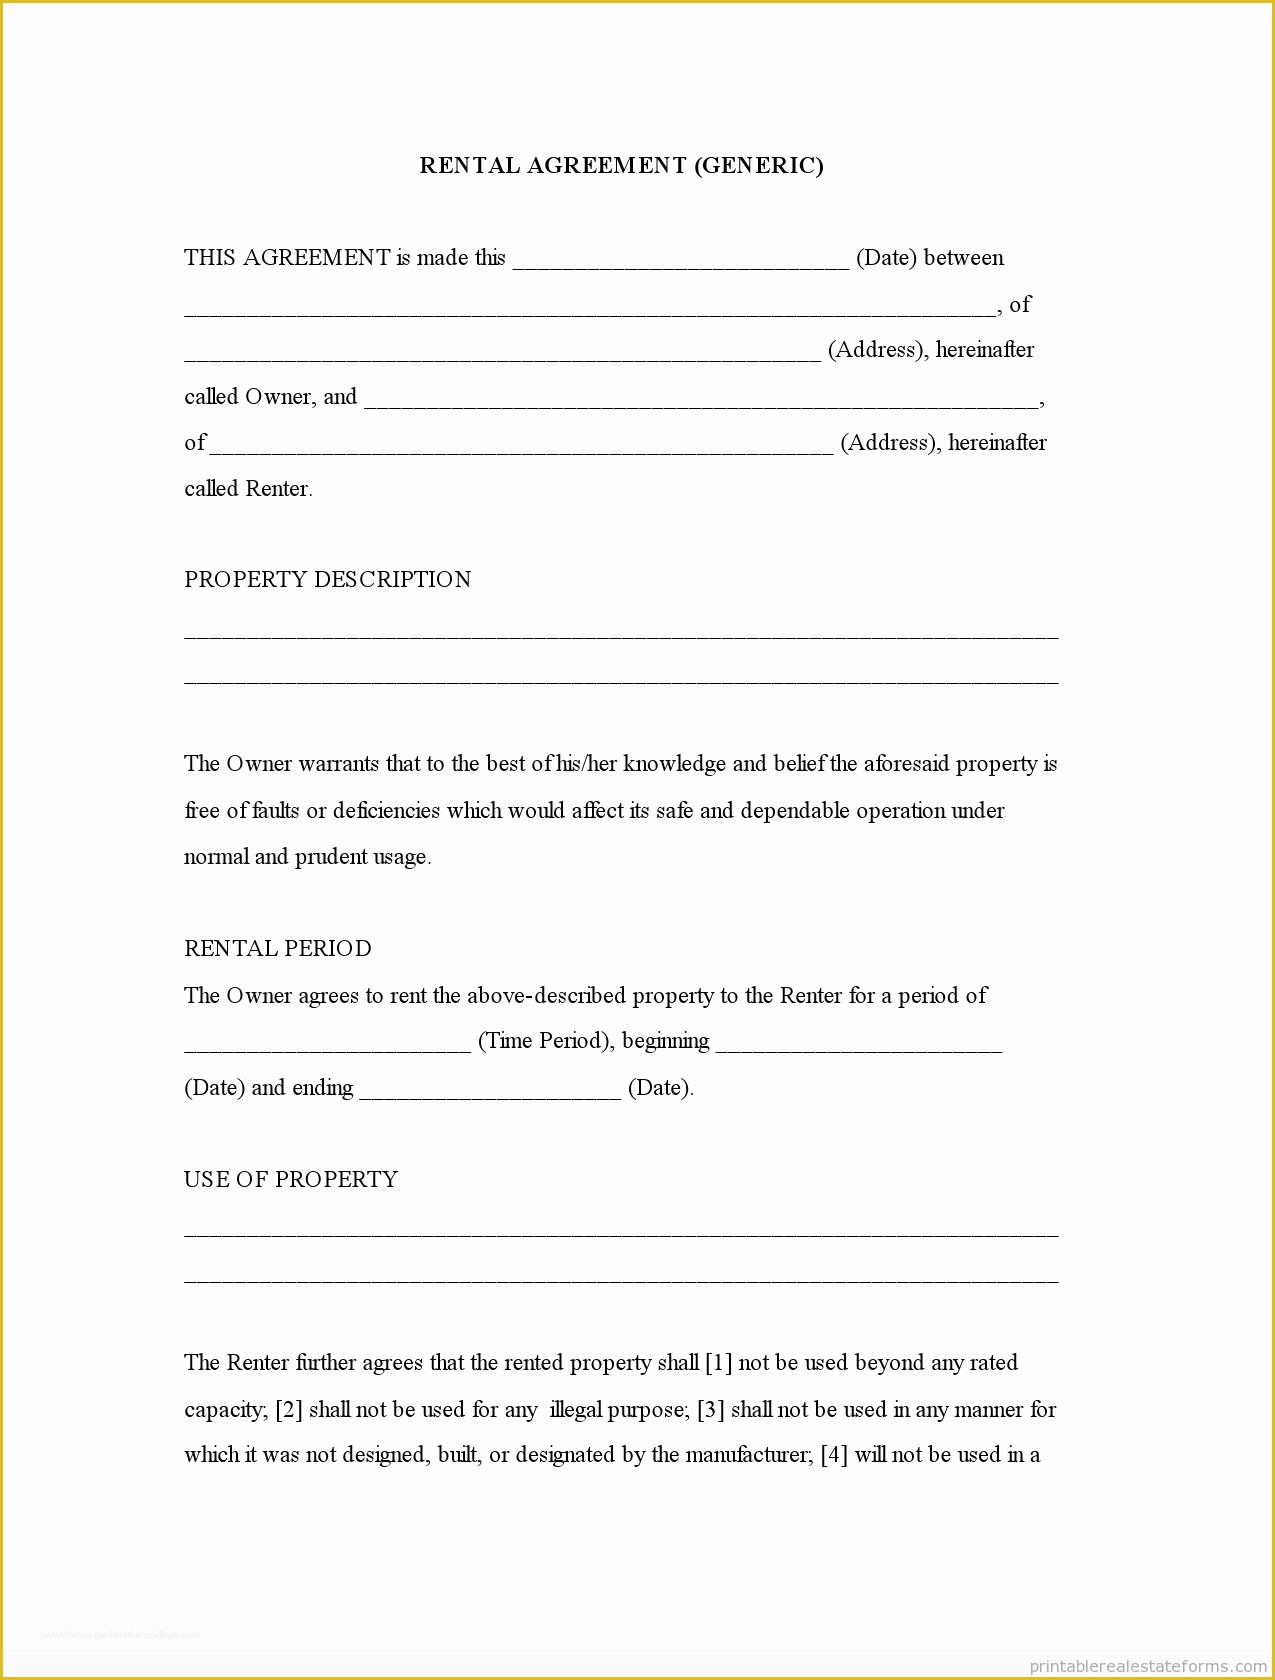 Tenancy Agreement form Template Free Of Generic Template Rental Agreement forms Free Printable